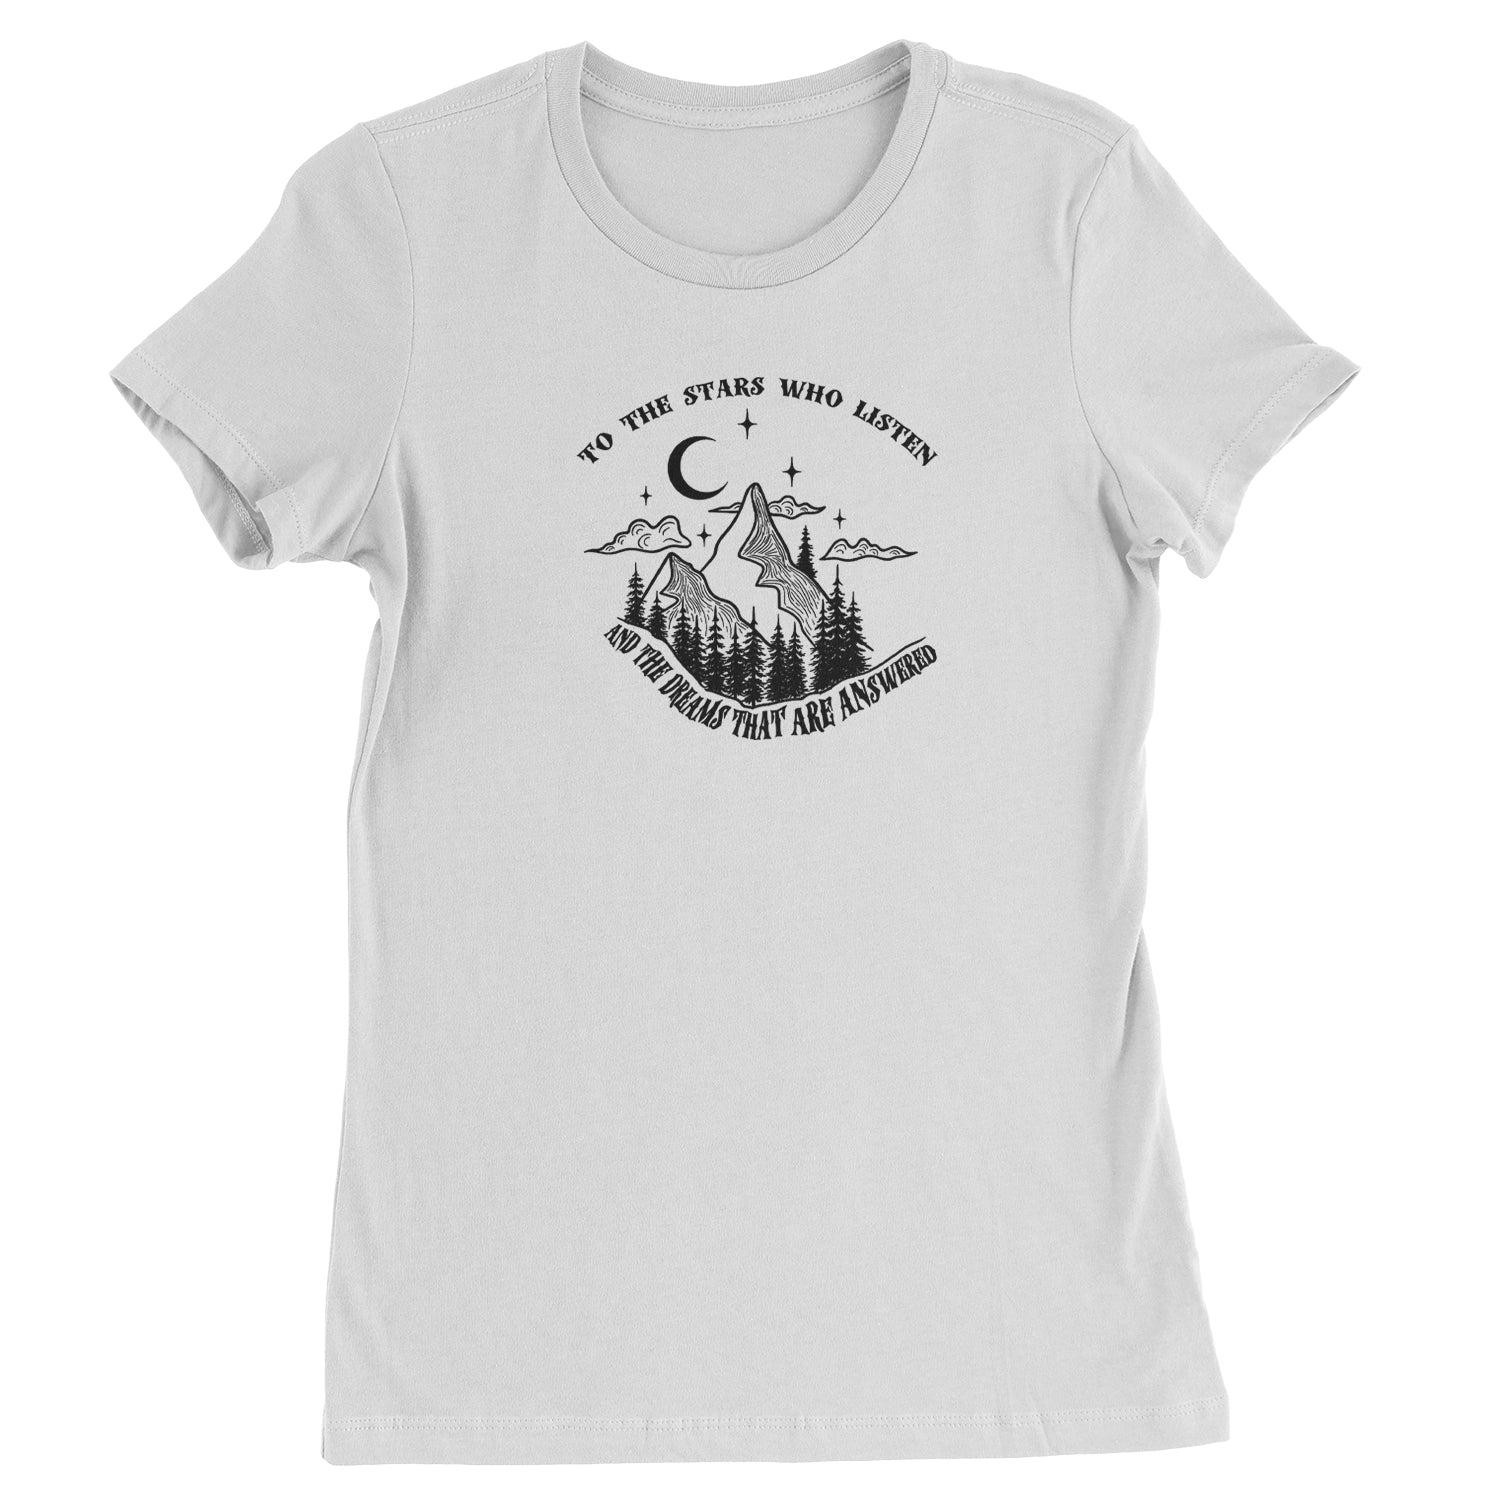 To The Stars Who Listen… ACOTAR Quote Womens T-shirt acotar, court, tamlin, thorns by Expression Tees